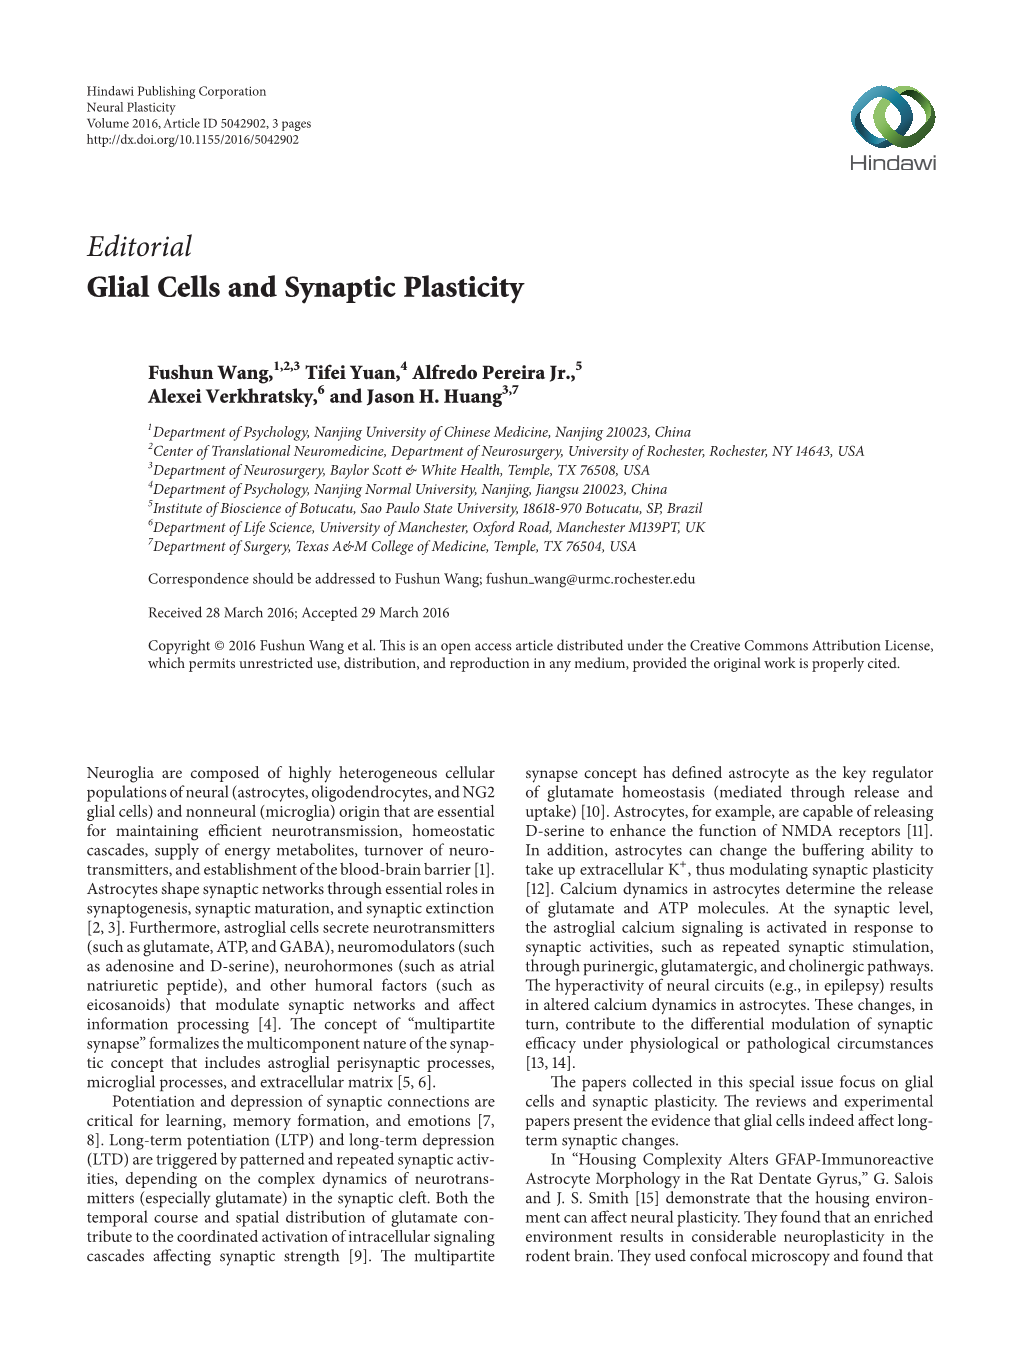 Editorial Glial Cells and Synaptic Plasticity